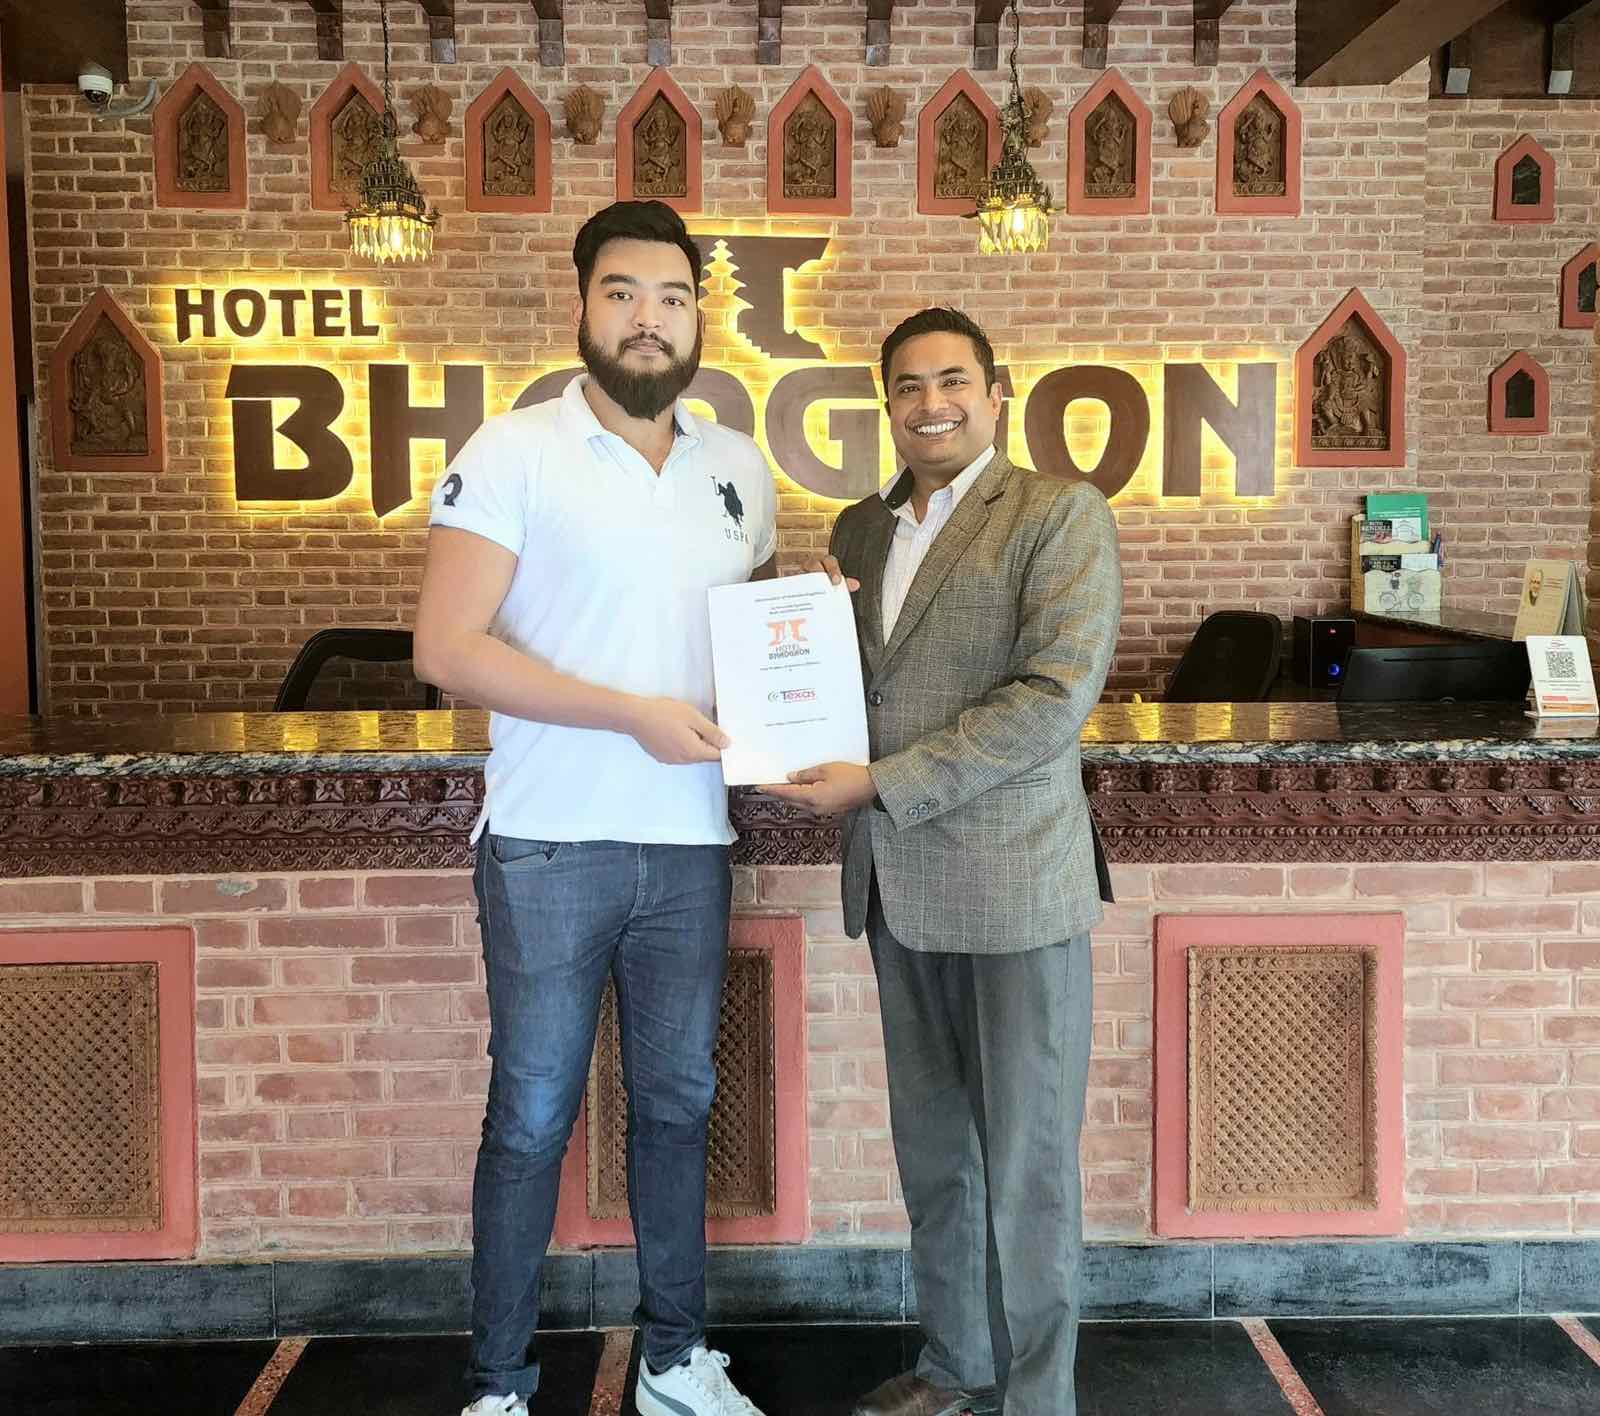 MOU signing ceremony in between Hotel Bhadgaon and TCMIT